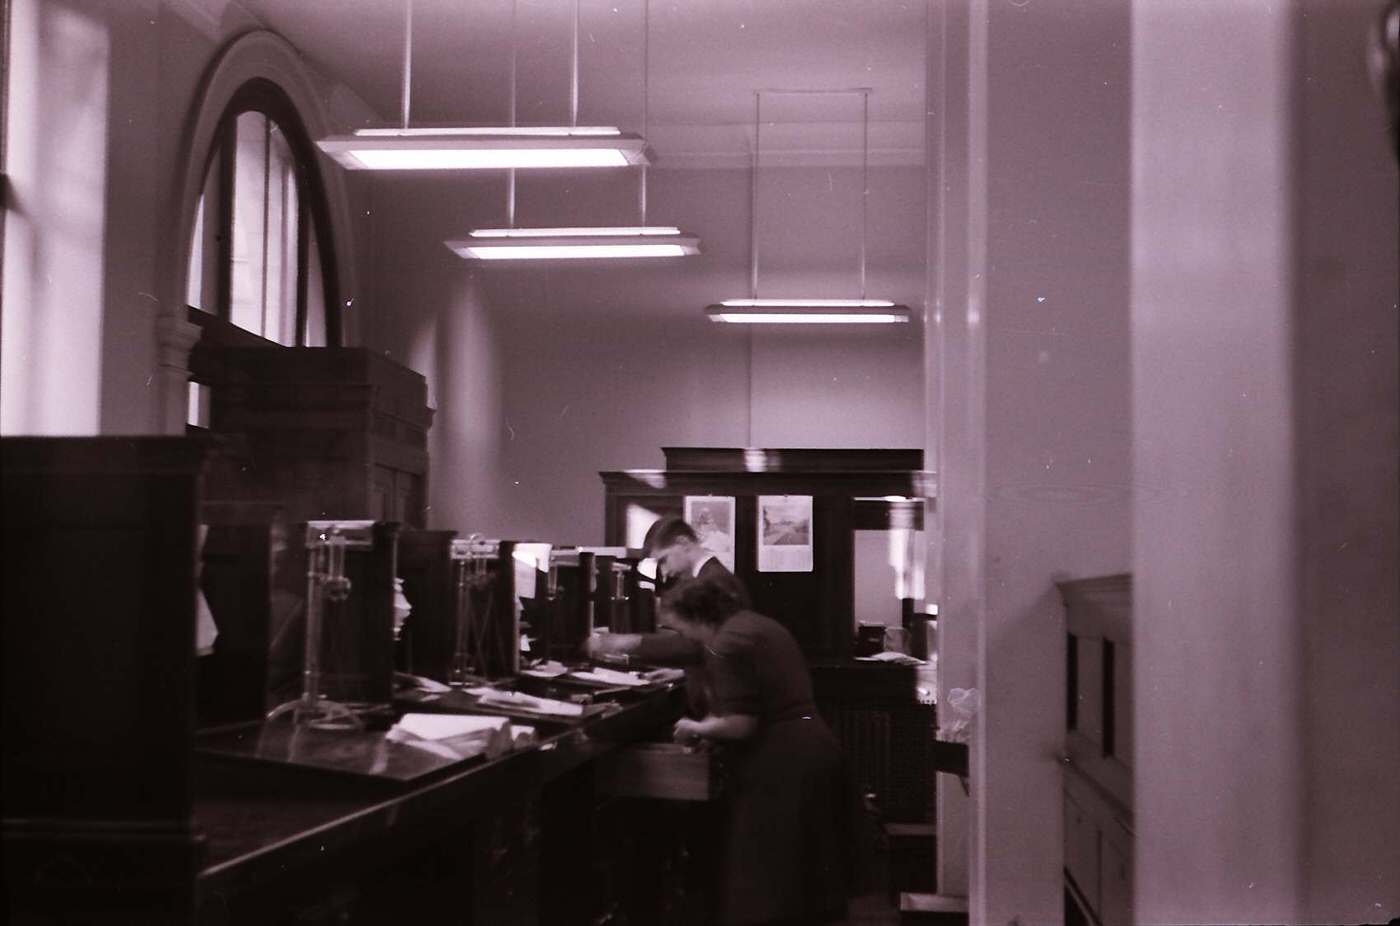 Vintage Photos Show the Staff at a London Westminster Bank, 1960